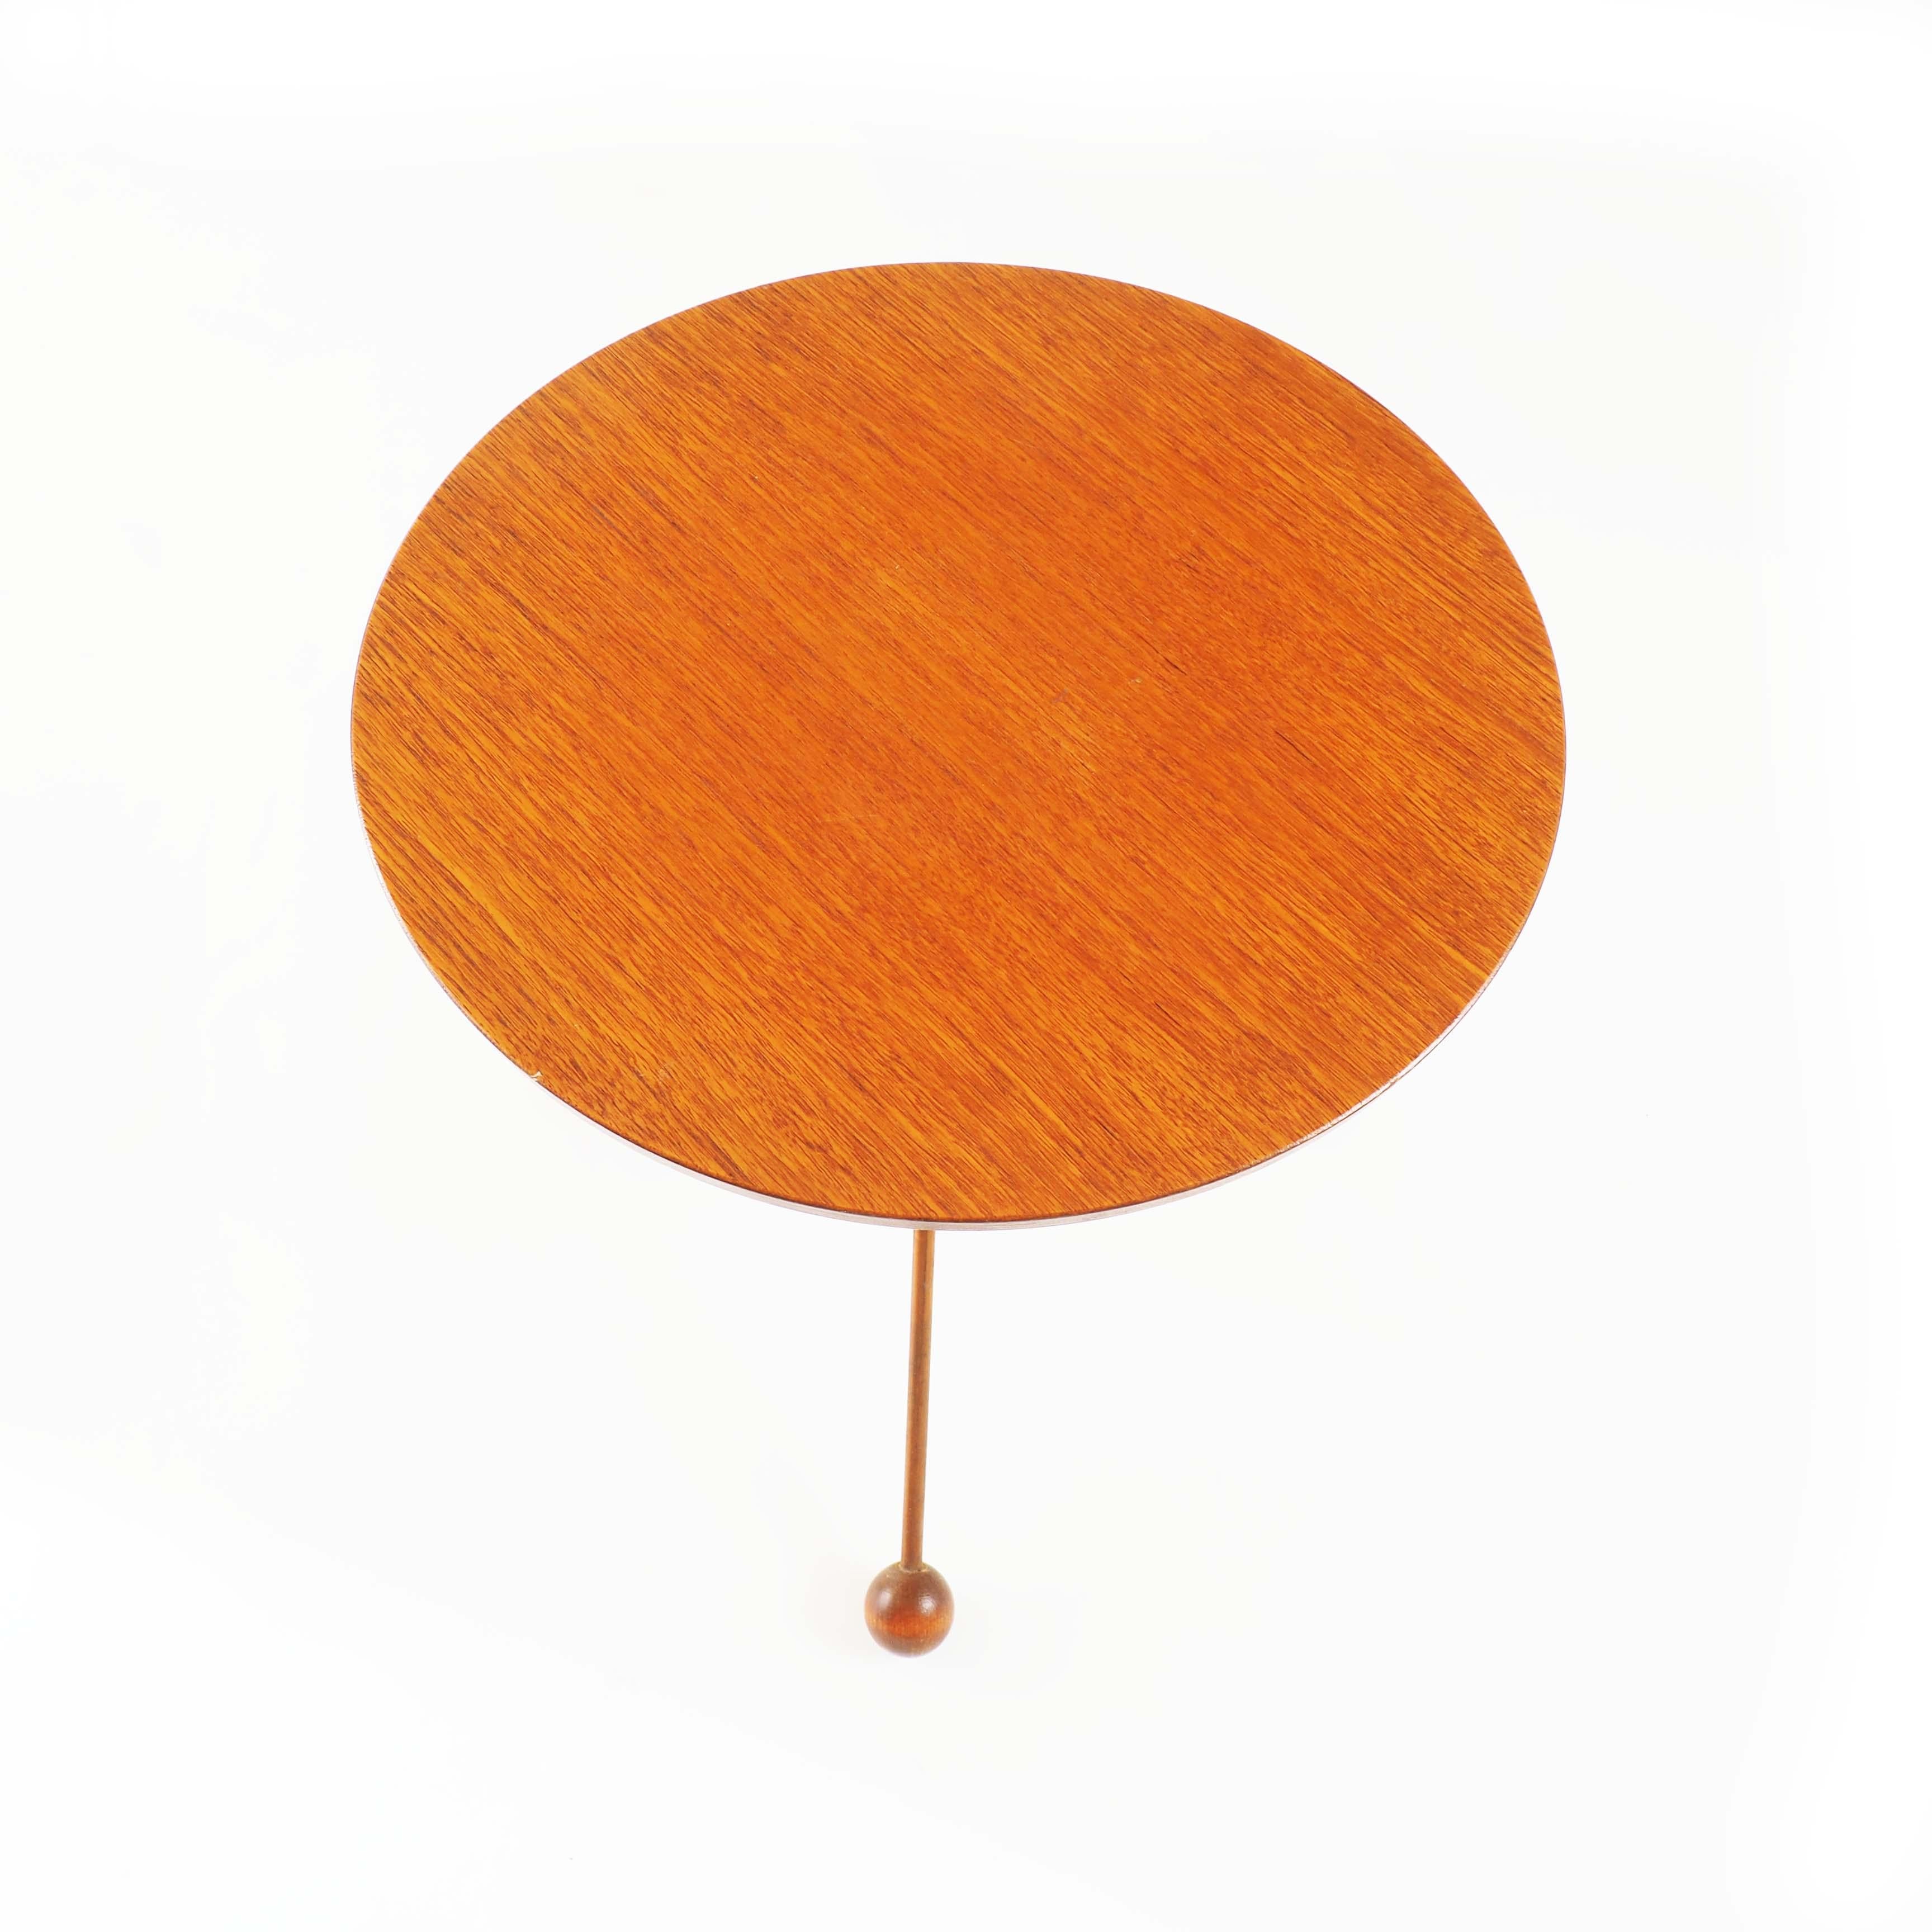 Mid-20th Century Side Table in Teak and Copper by Alberts, Sweden